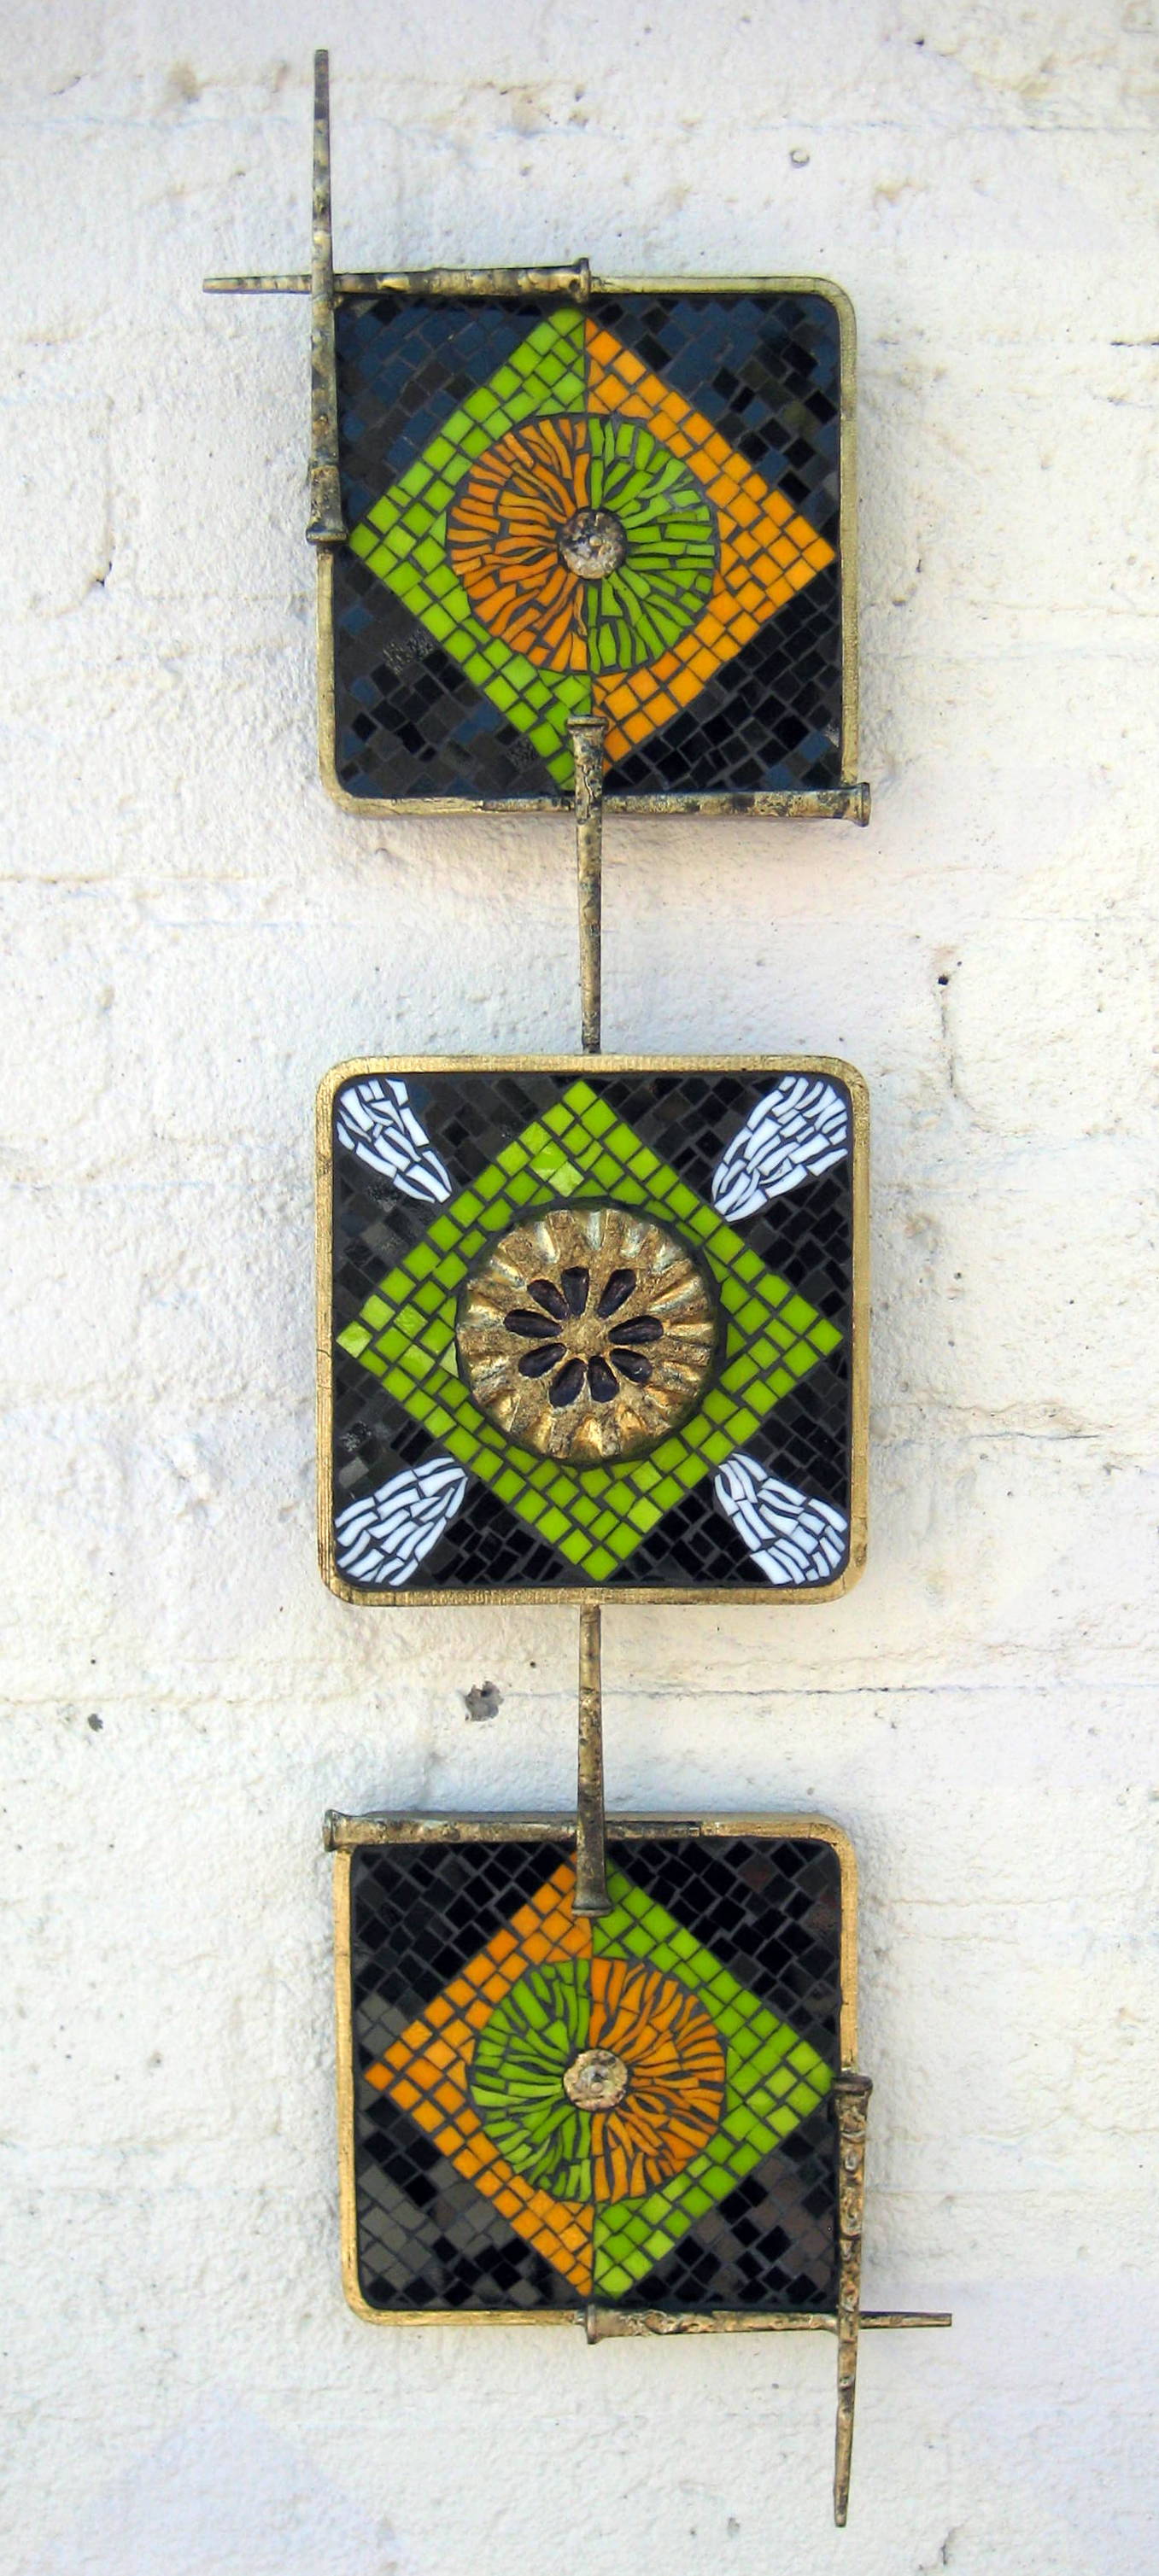 An original mosaic and welded steel sculpture by Del and Brenda Williams For Sale